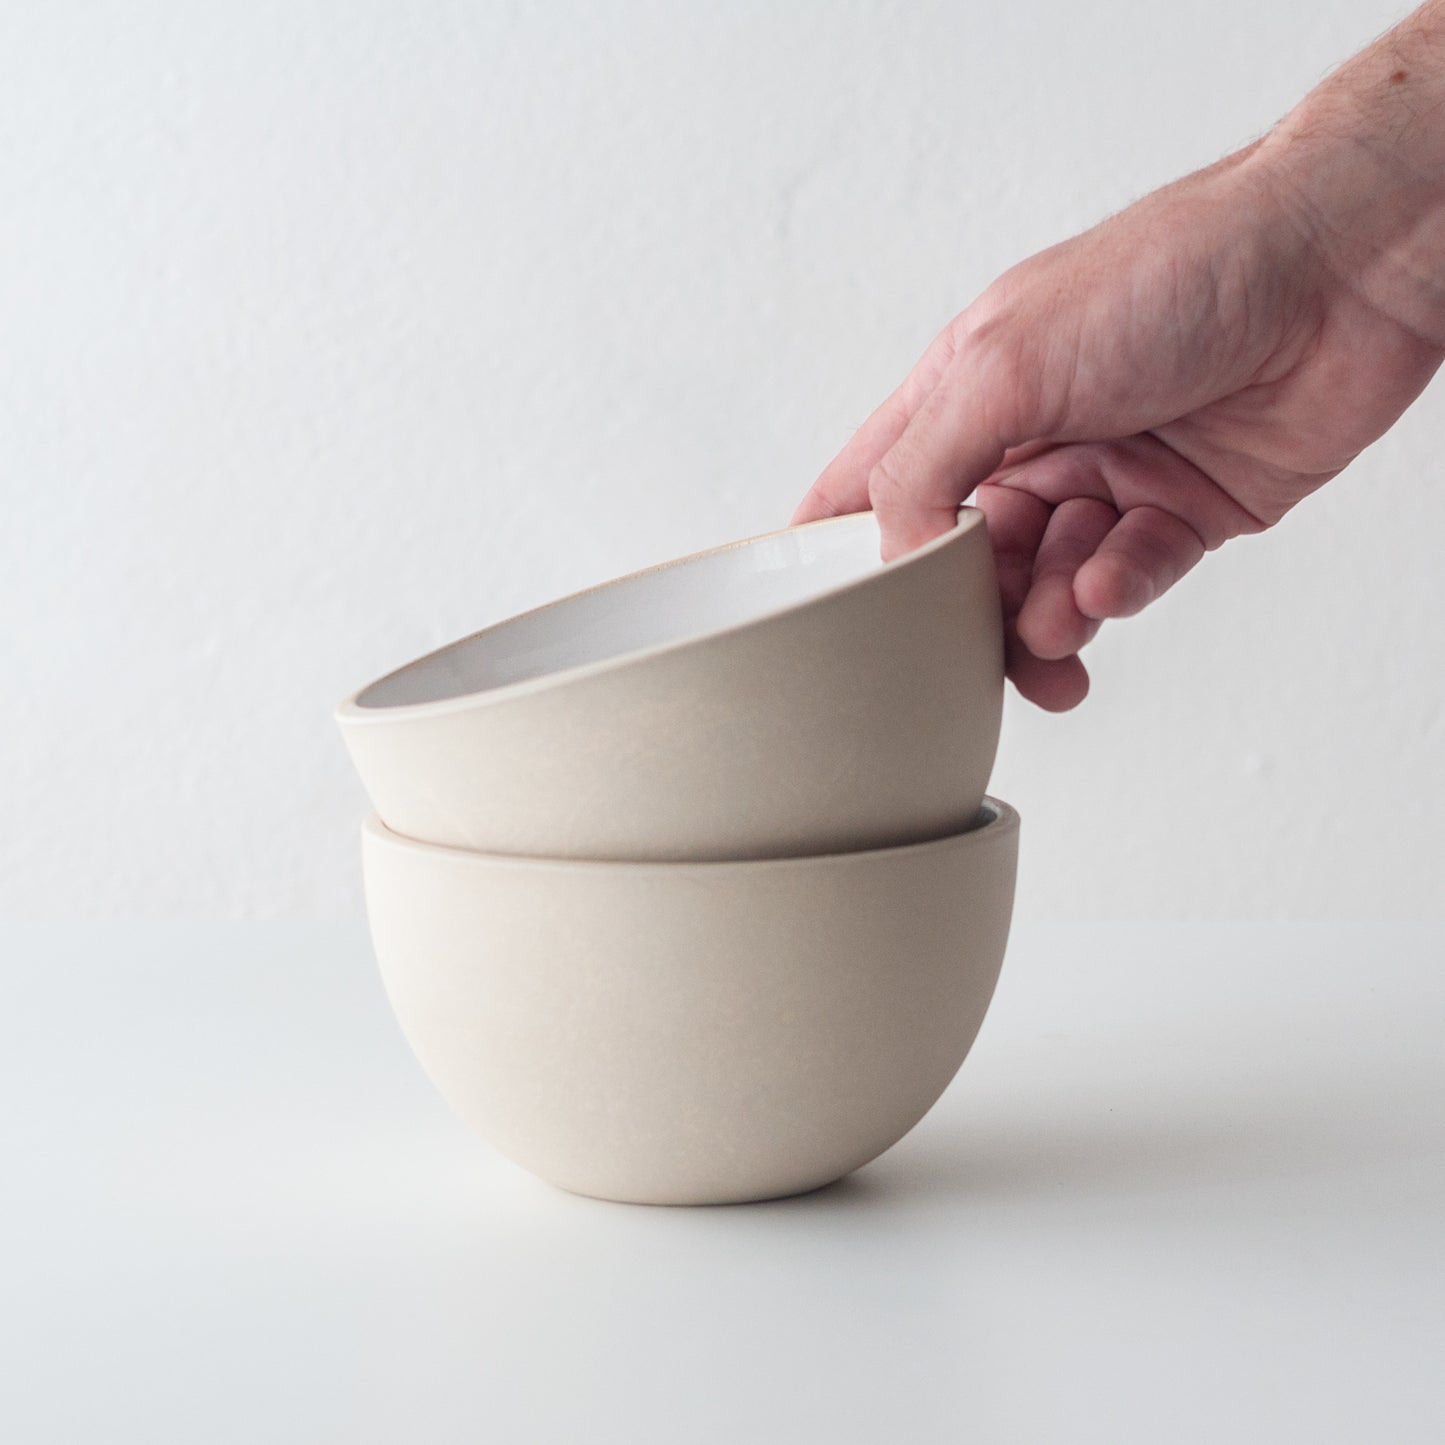 Everyday Cereal Bowl - White